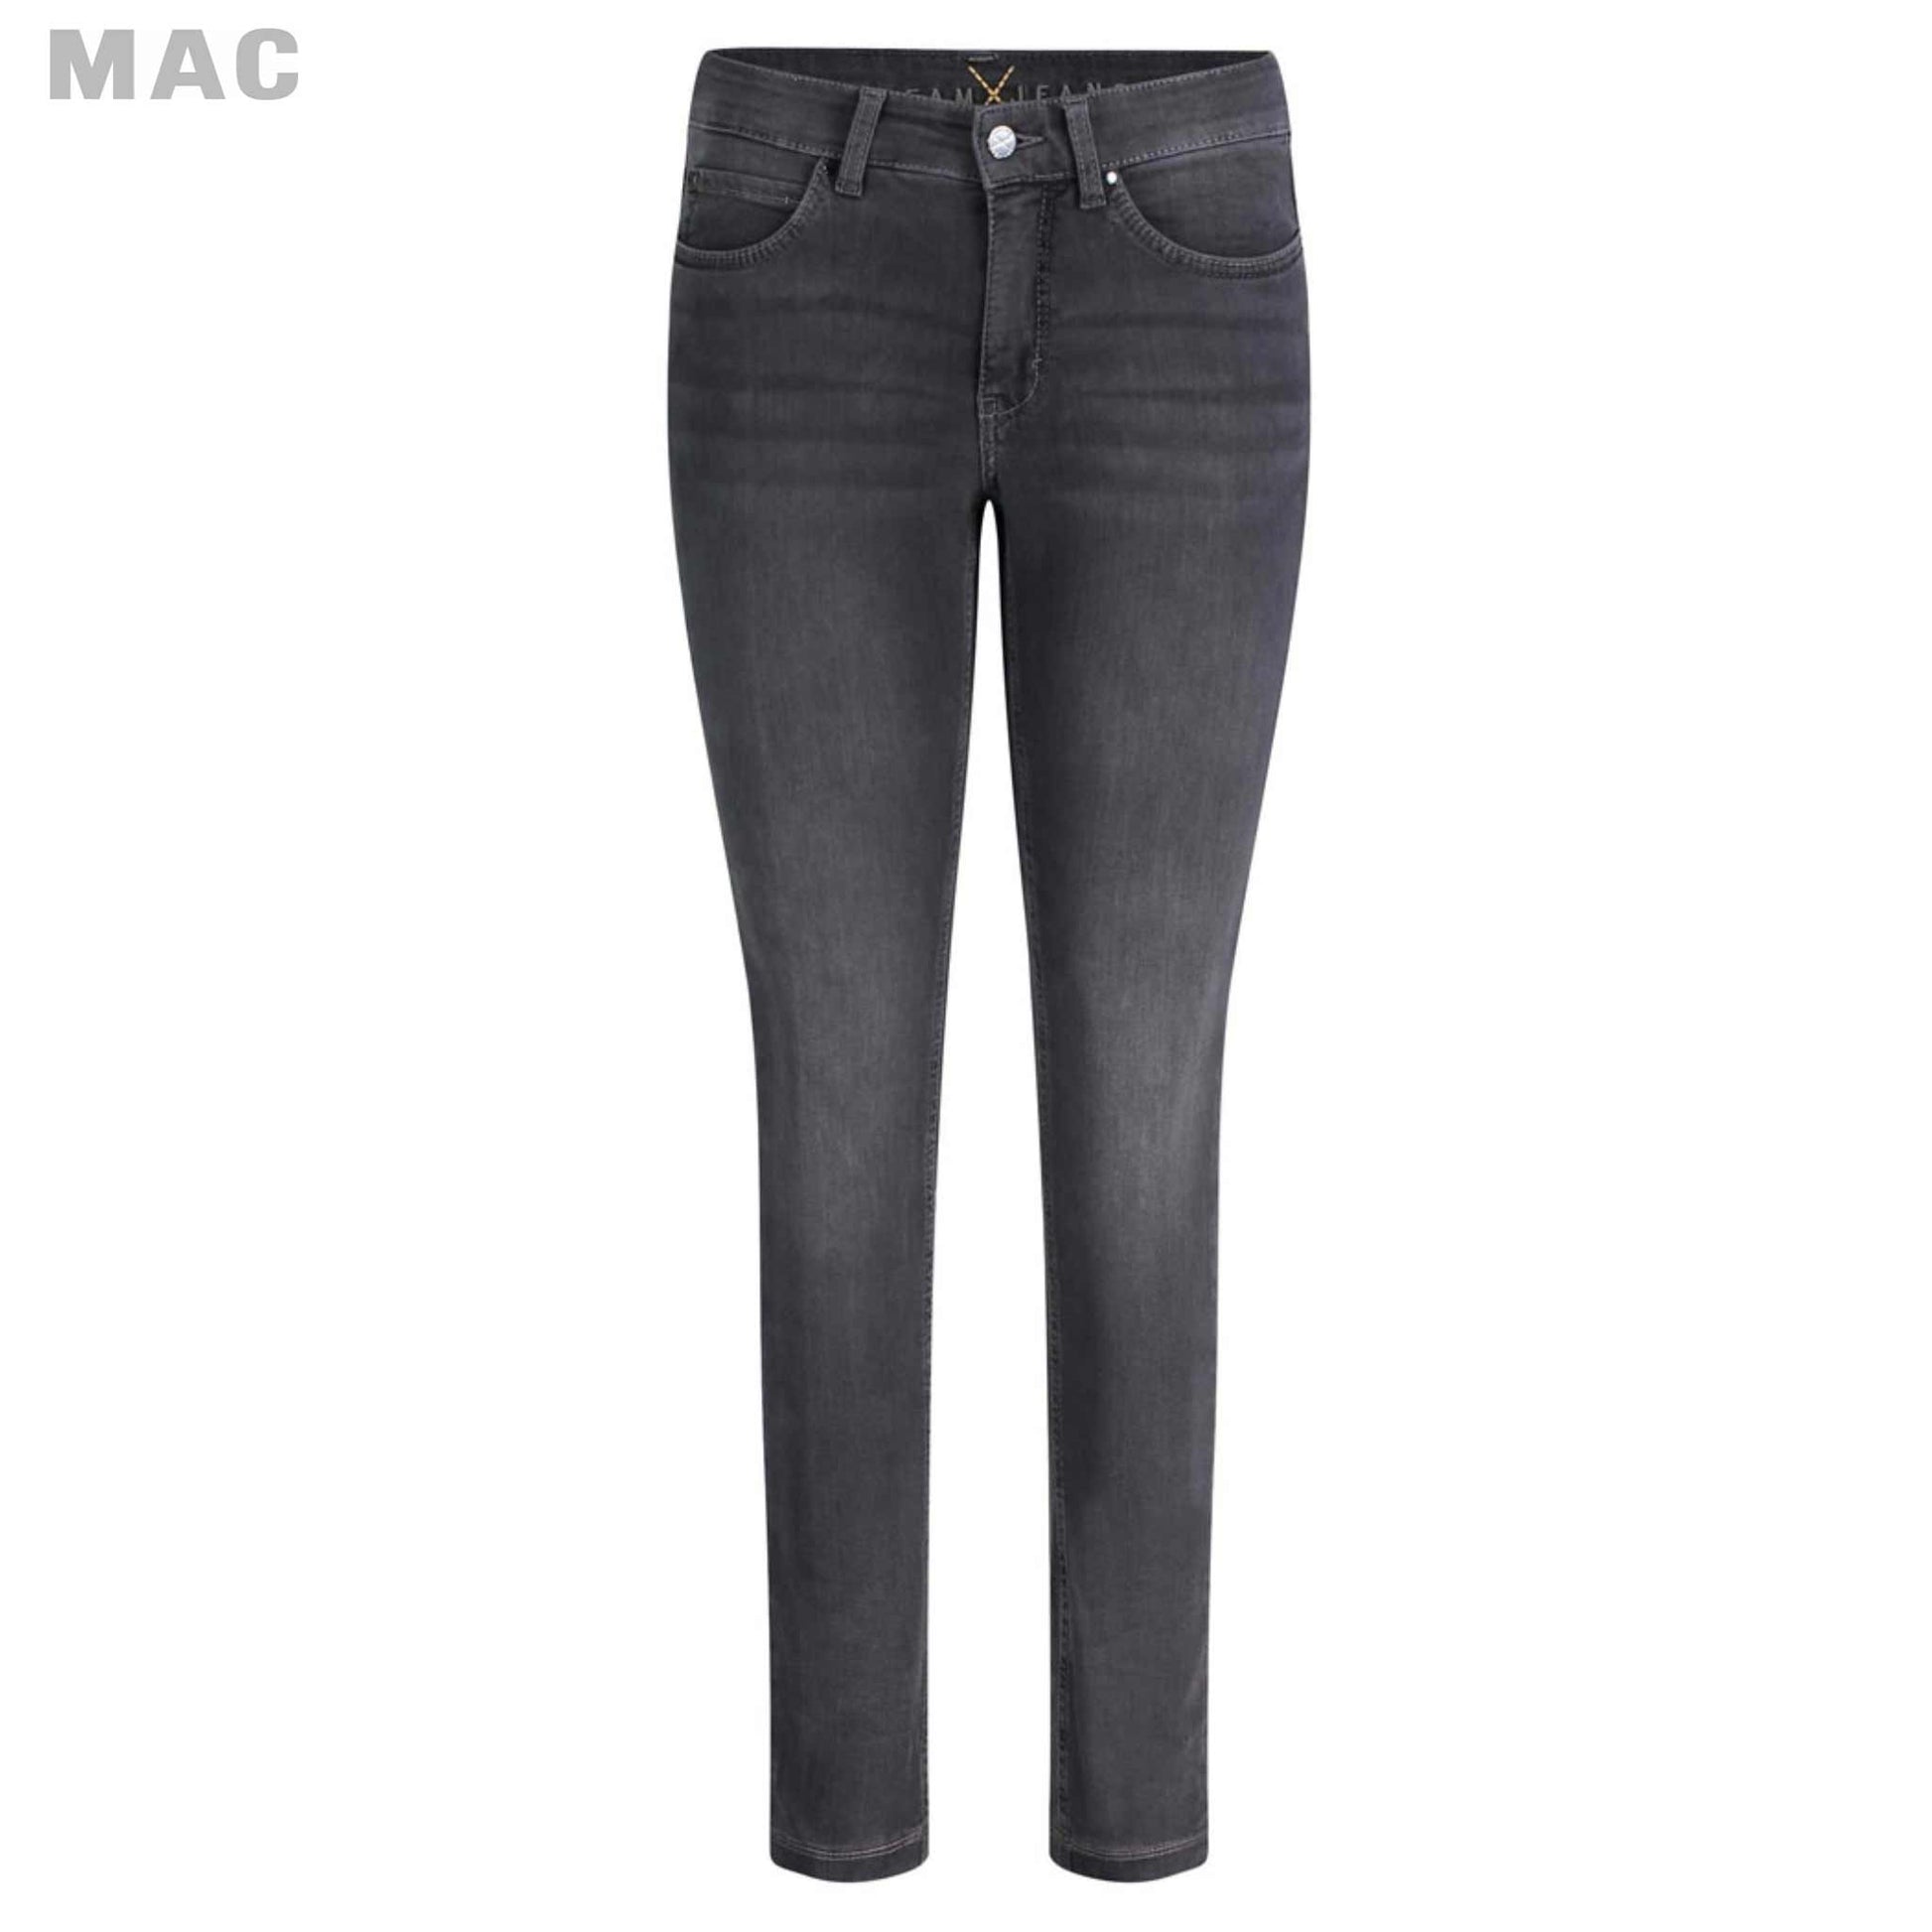 clothing tall women mac jeans dream skinny gray washed